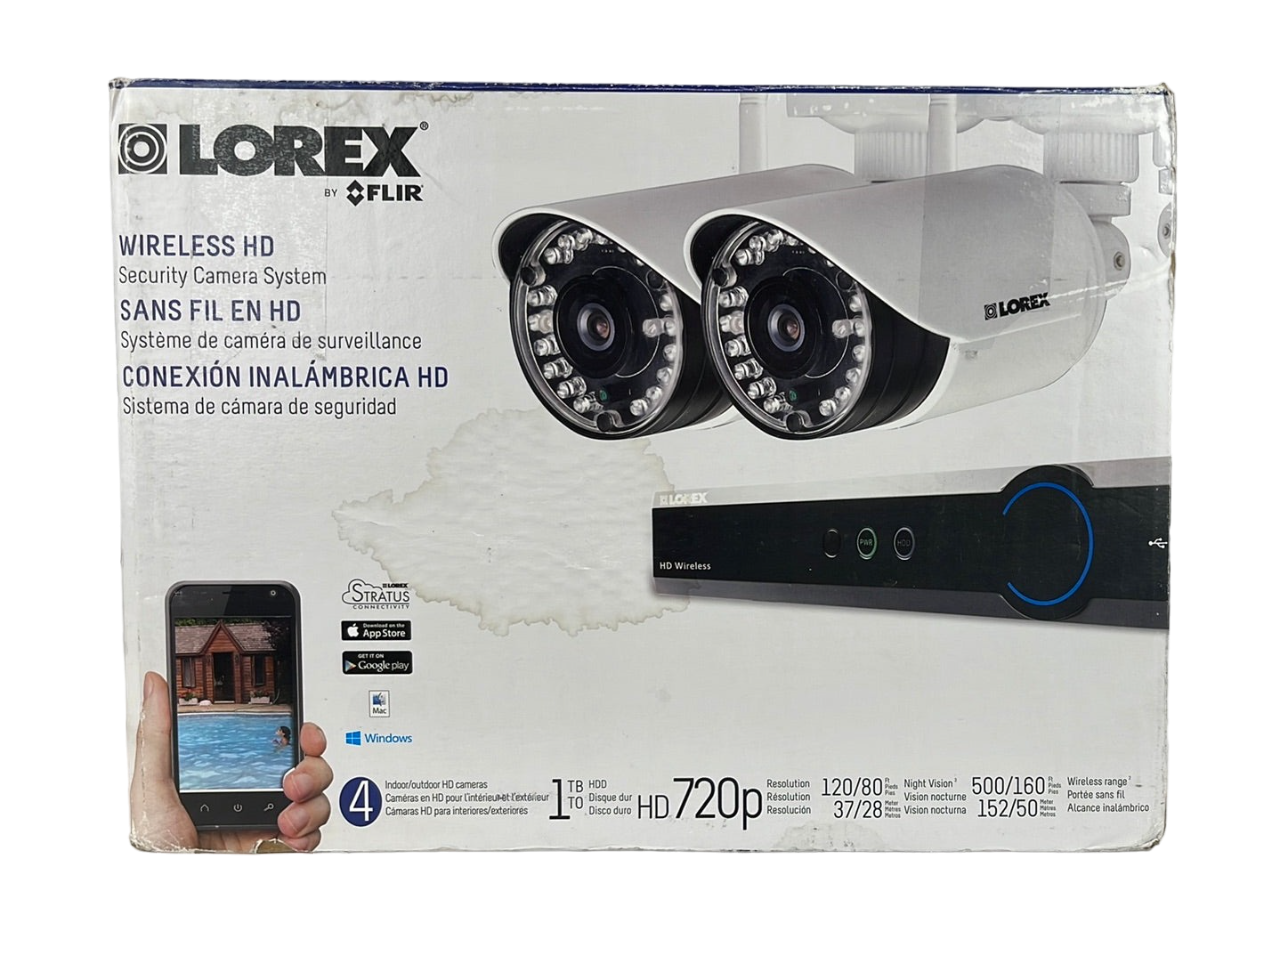 Lorex Wireless HD Security Camera System, 4 HD Cameras with Night Vision, 1TB